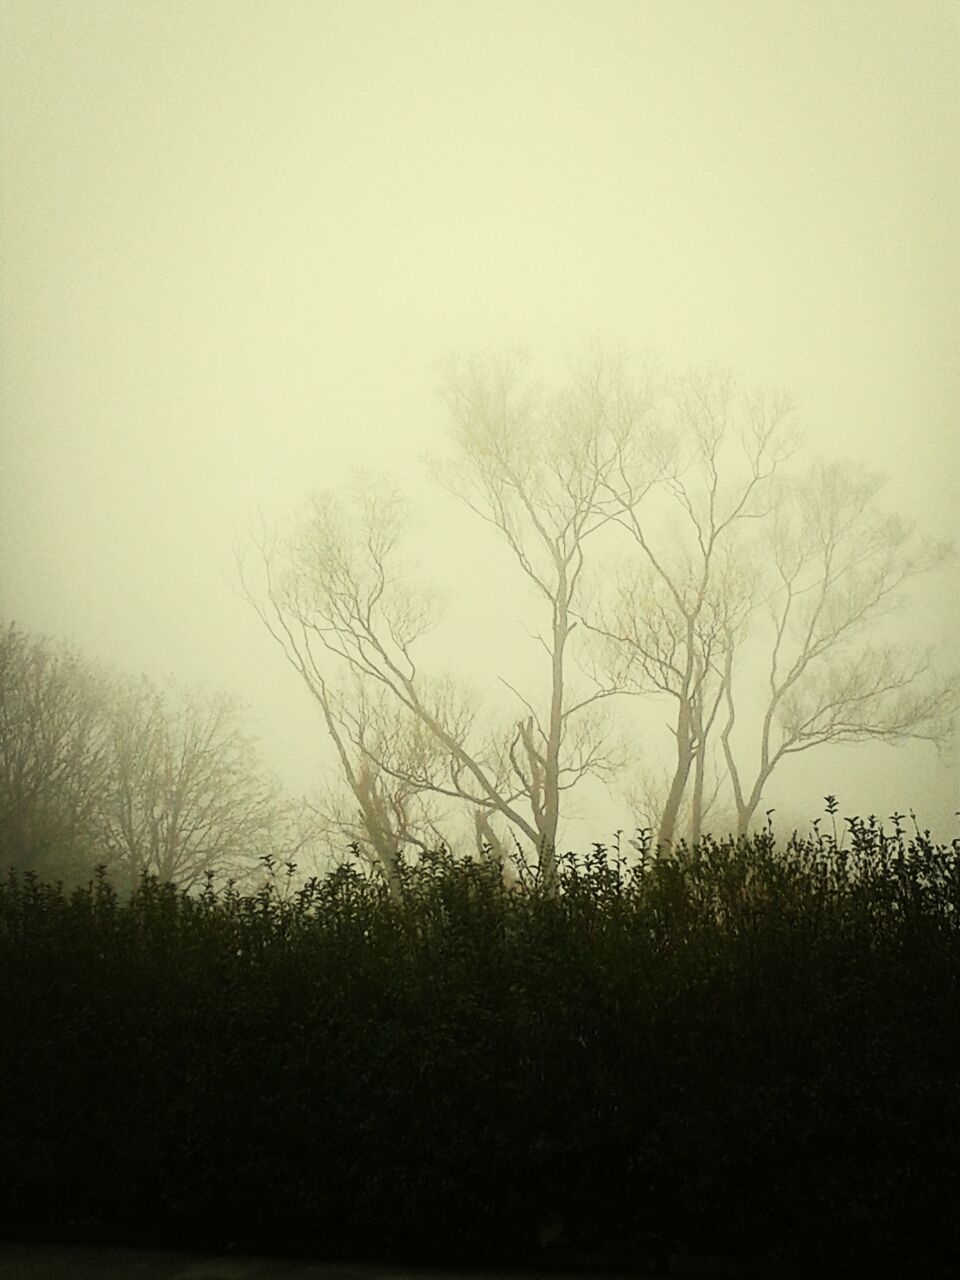 Bare trees against foggy weather